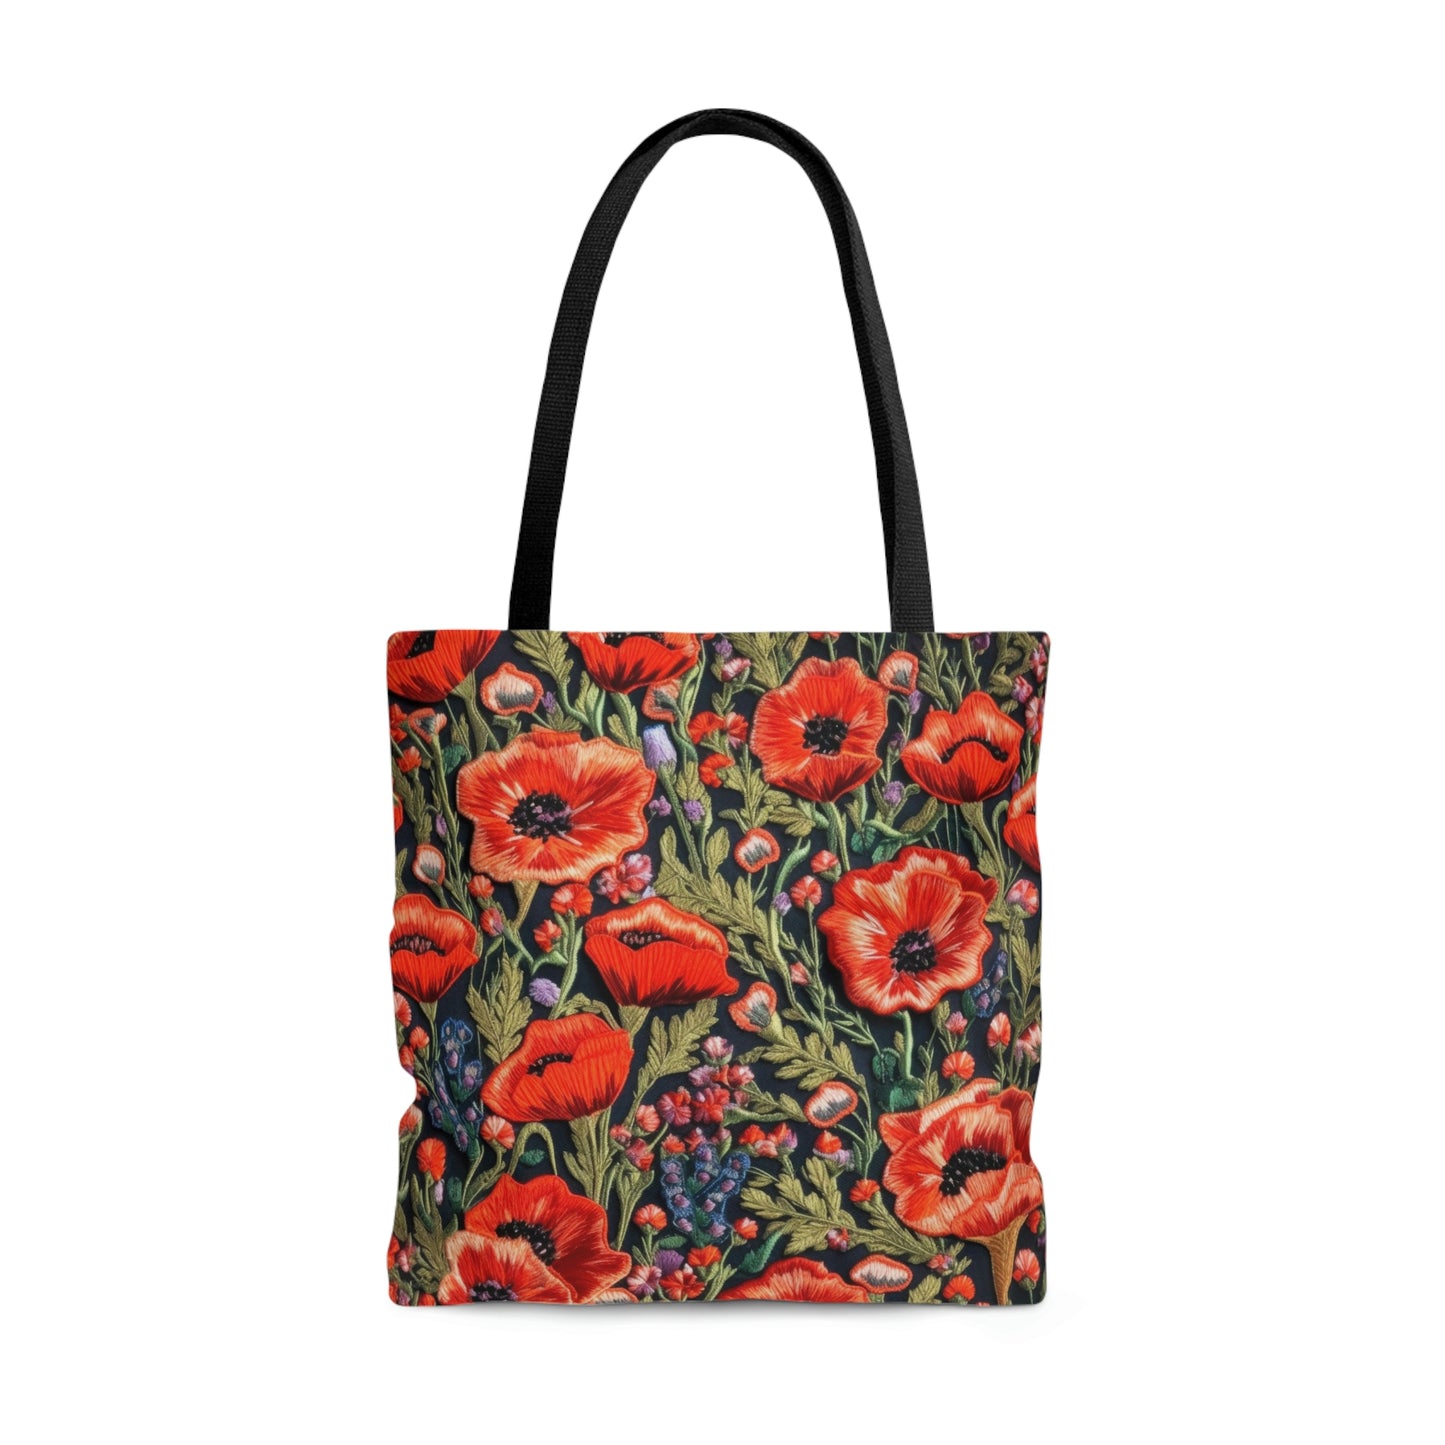 Ukrainian Poppy Seed Embroidery Design Tote Bag